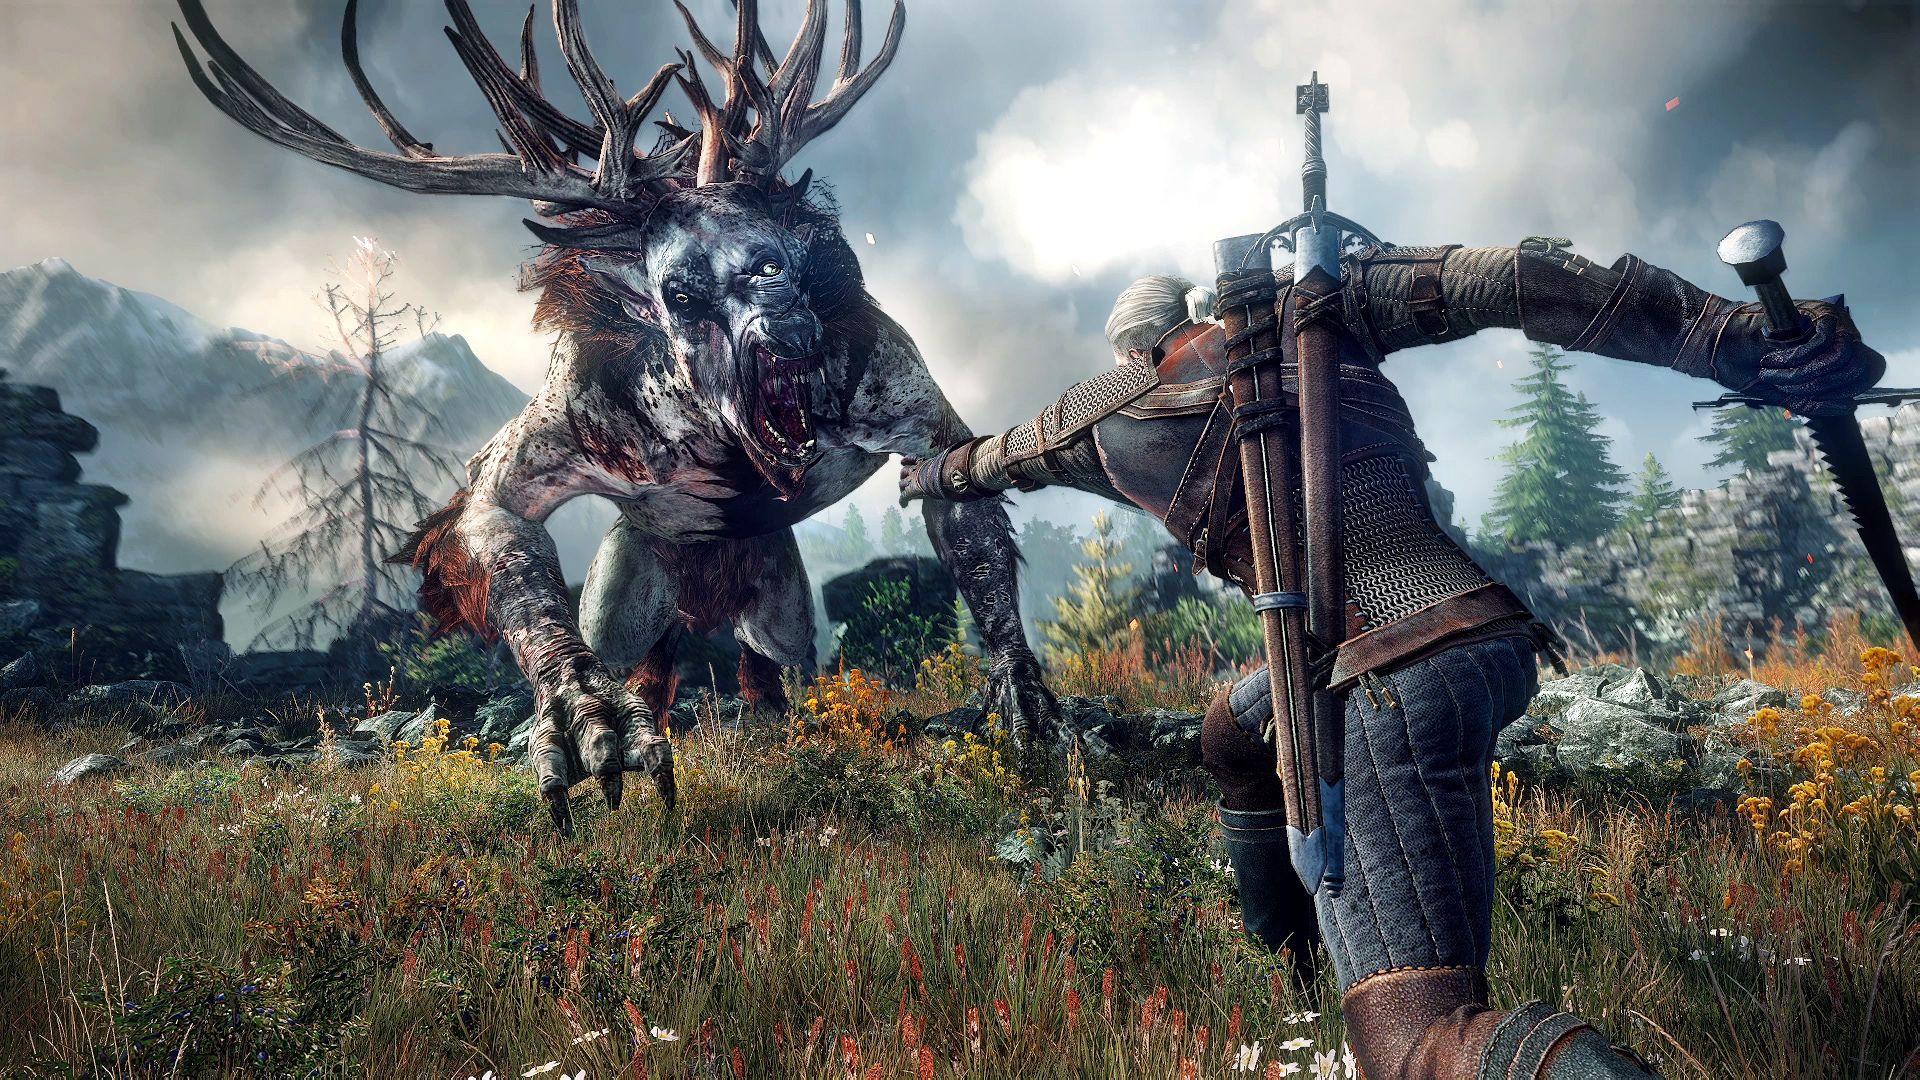 Image The Witcher The Witcher 3: Wild Hunt Armor Swords 1920x1080